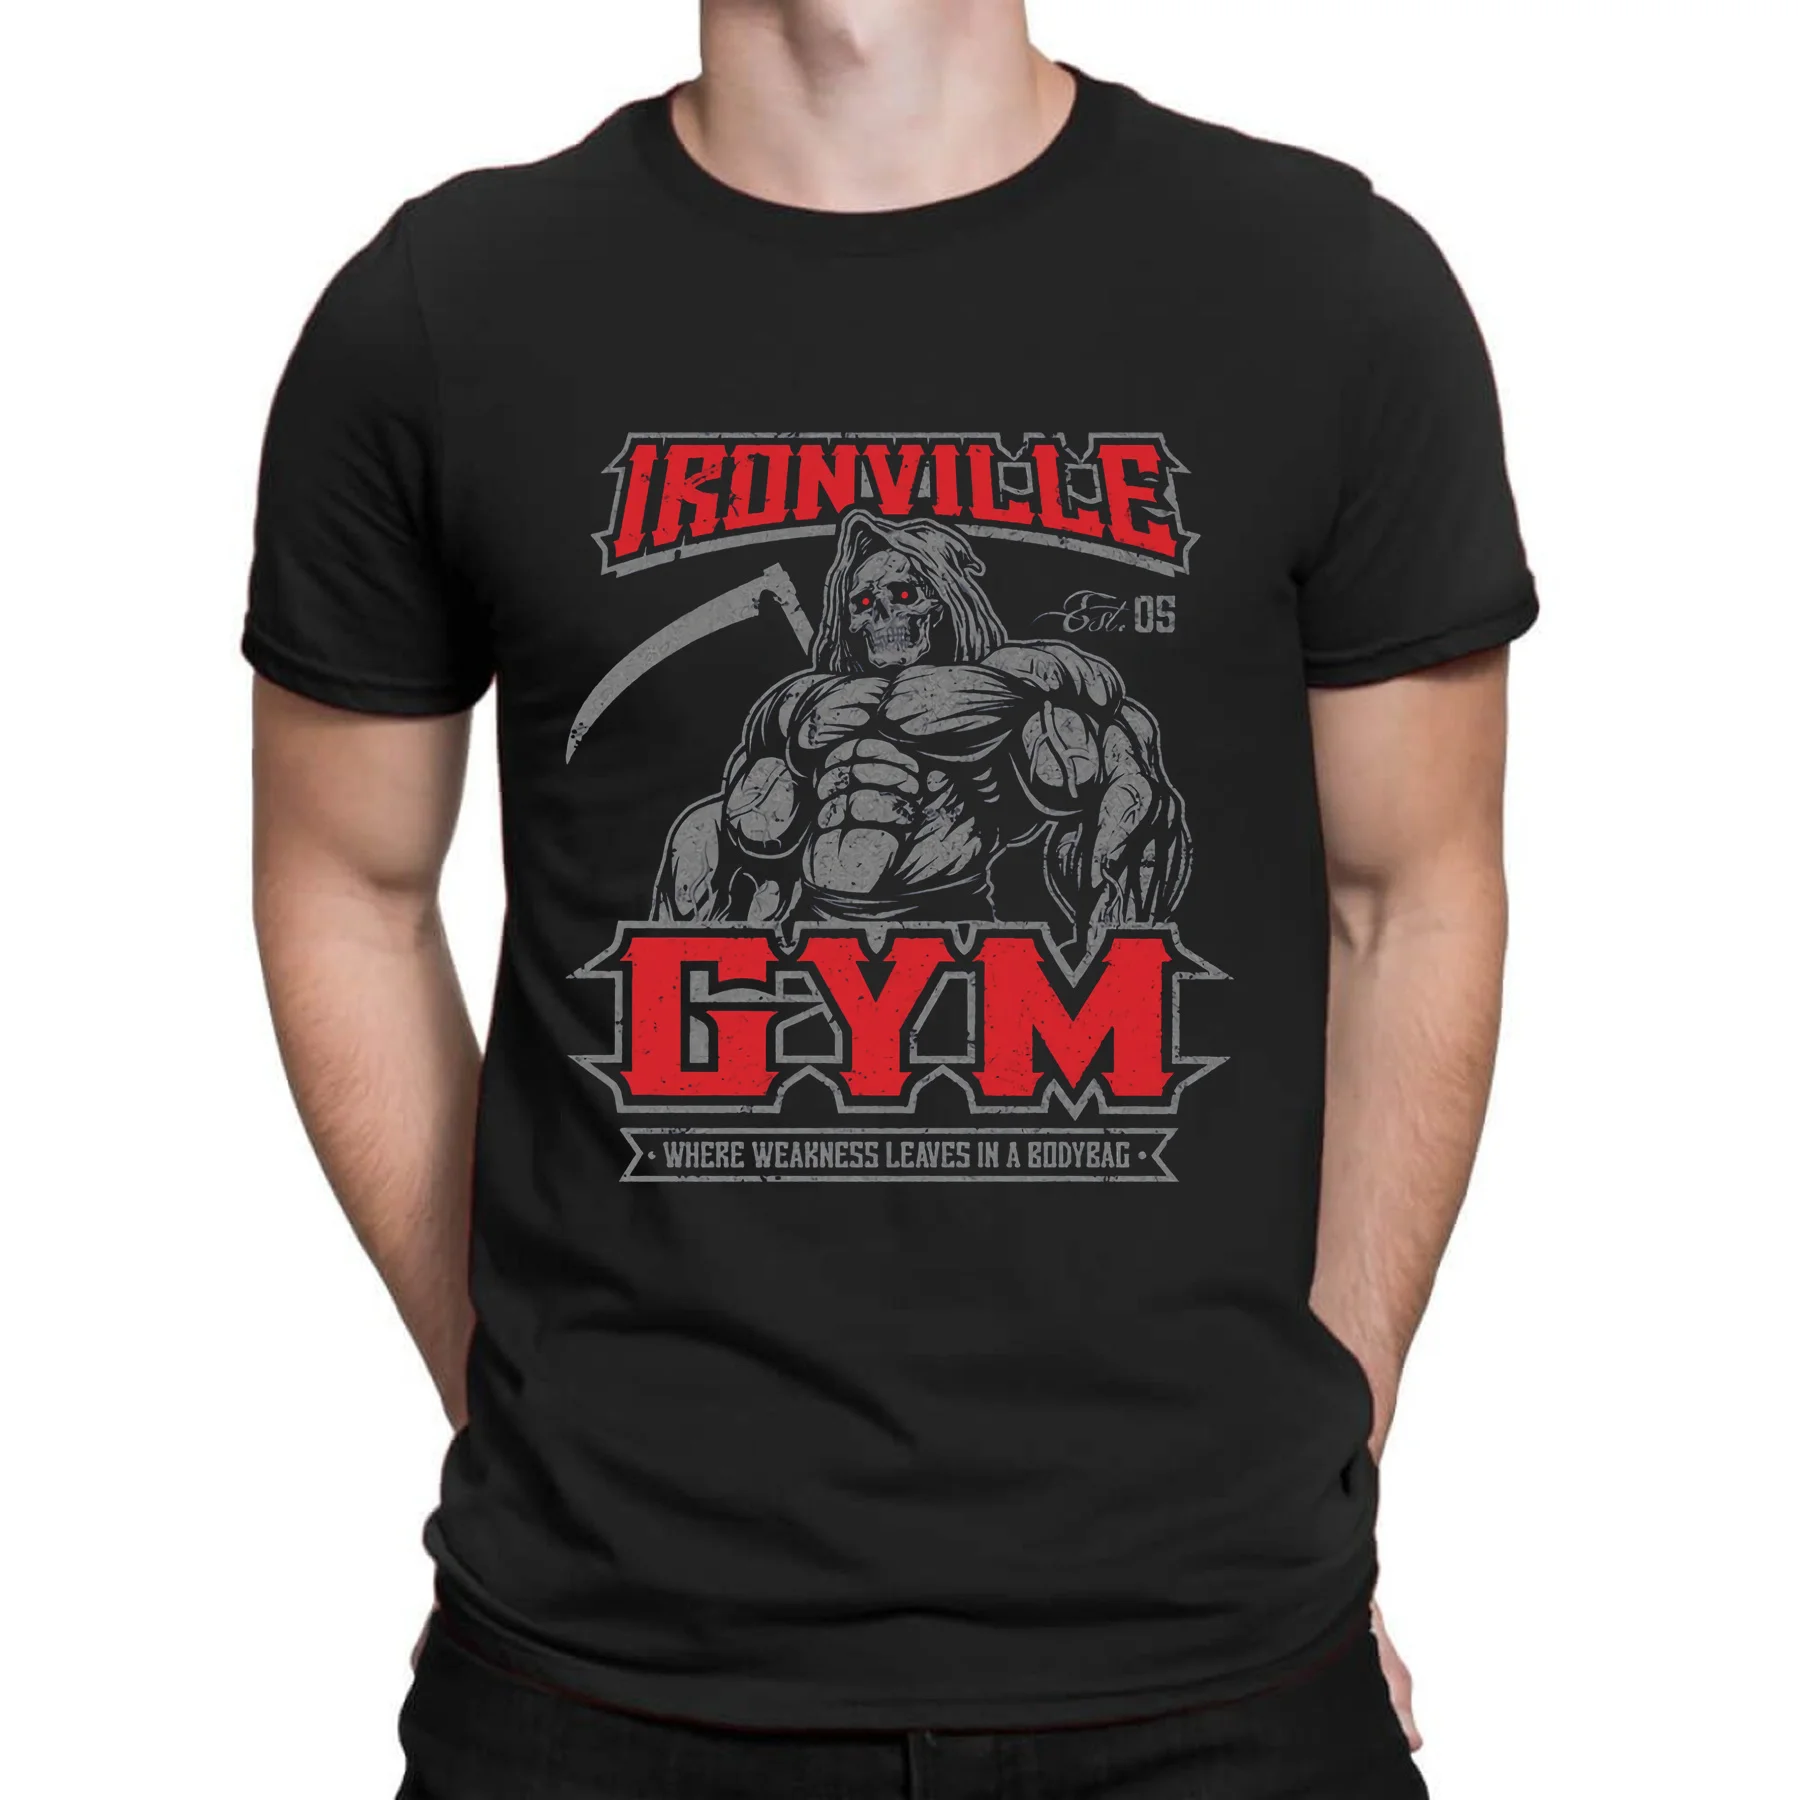 

Amazing Tees Male T Shirt Casual Oversized Ironville Gym Reaper Crossfit Essential T-shirt Men T-shirts Graphic Streetwear S-3XL